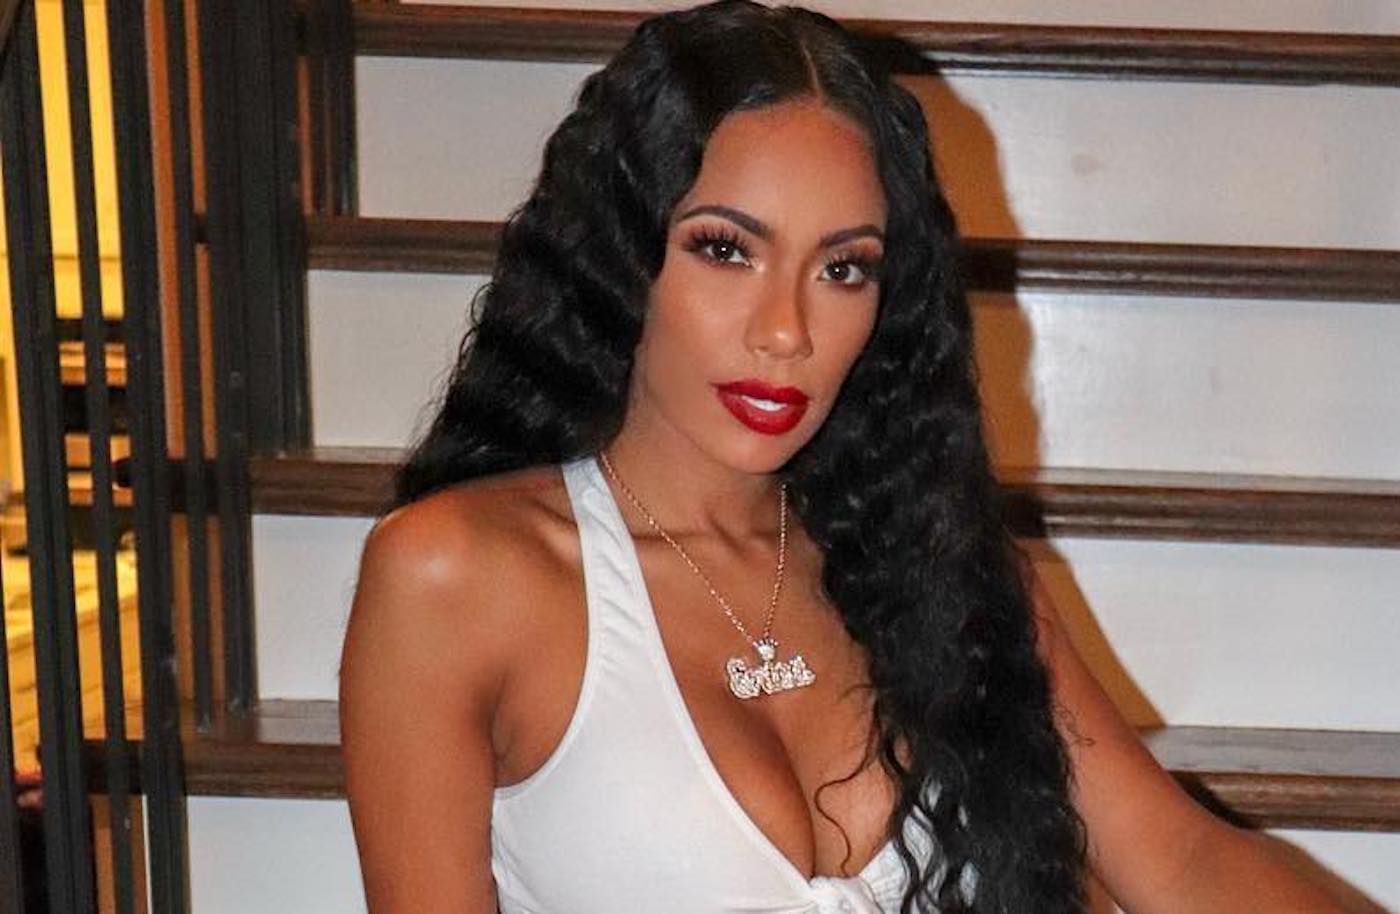 Erica Mena Publicly Says She Has Other Options To Explore As Well